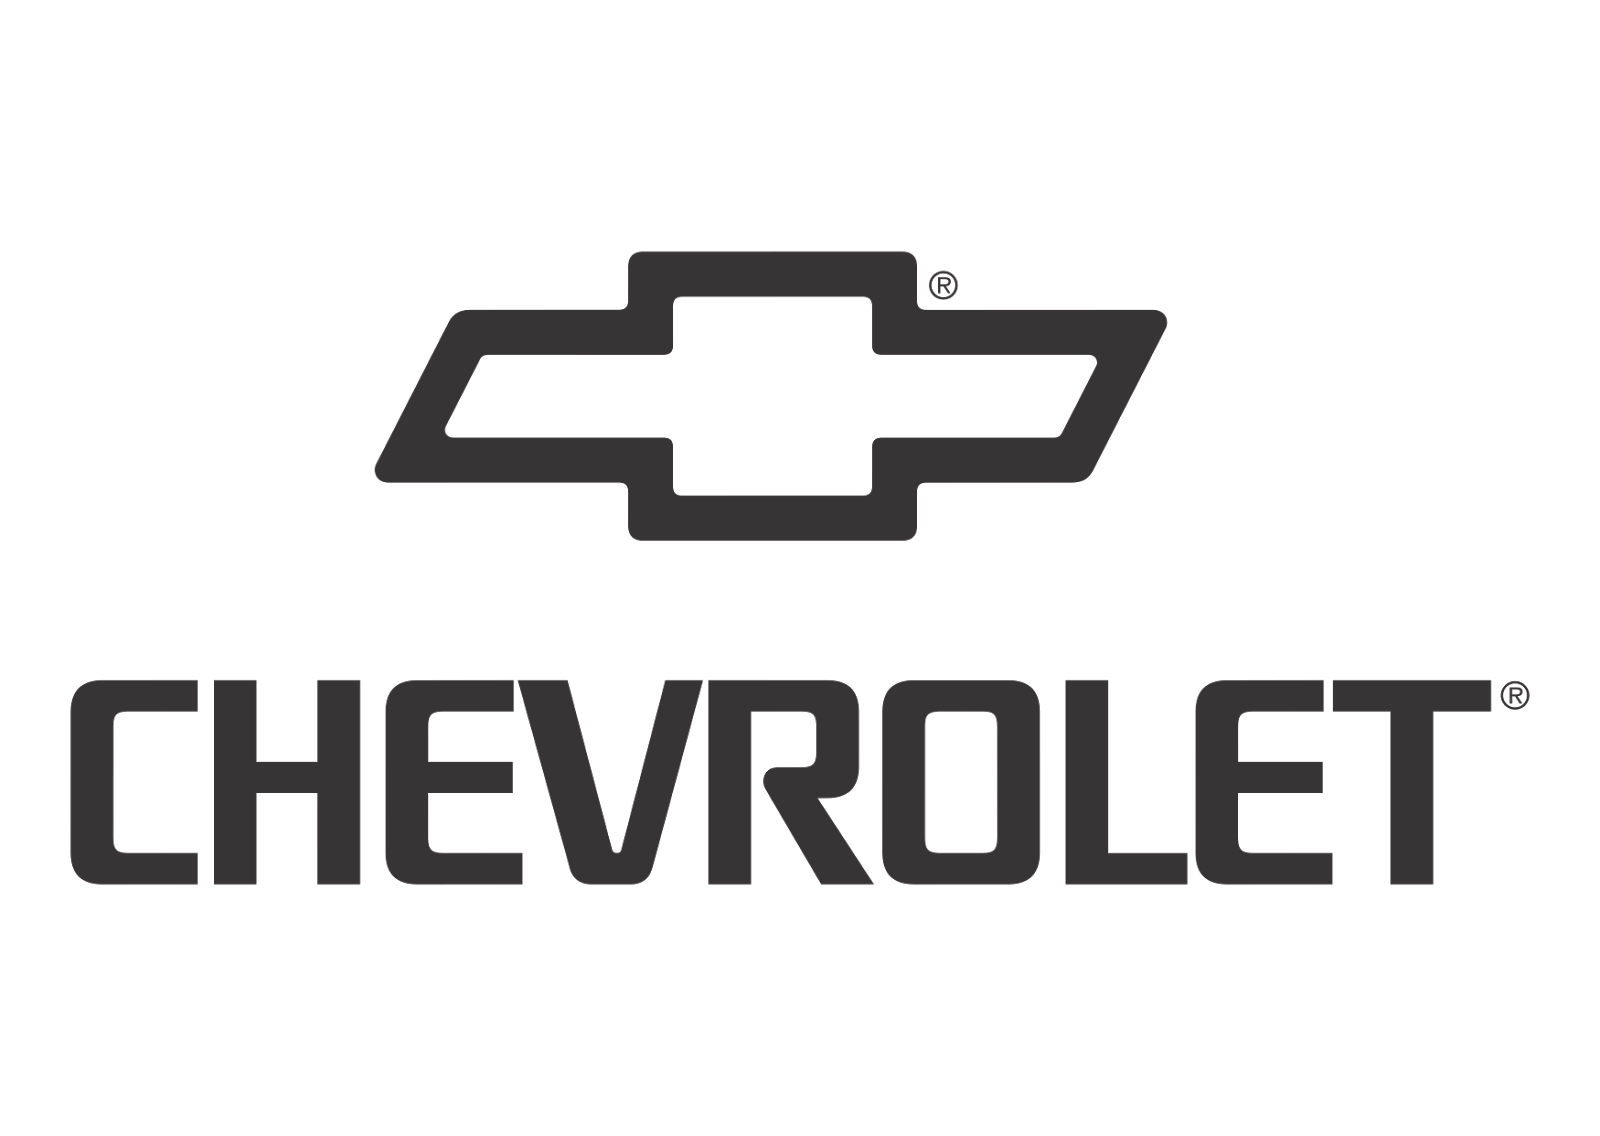 15 Chevy Logo Vector Images